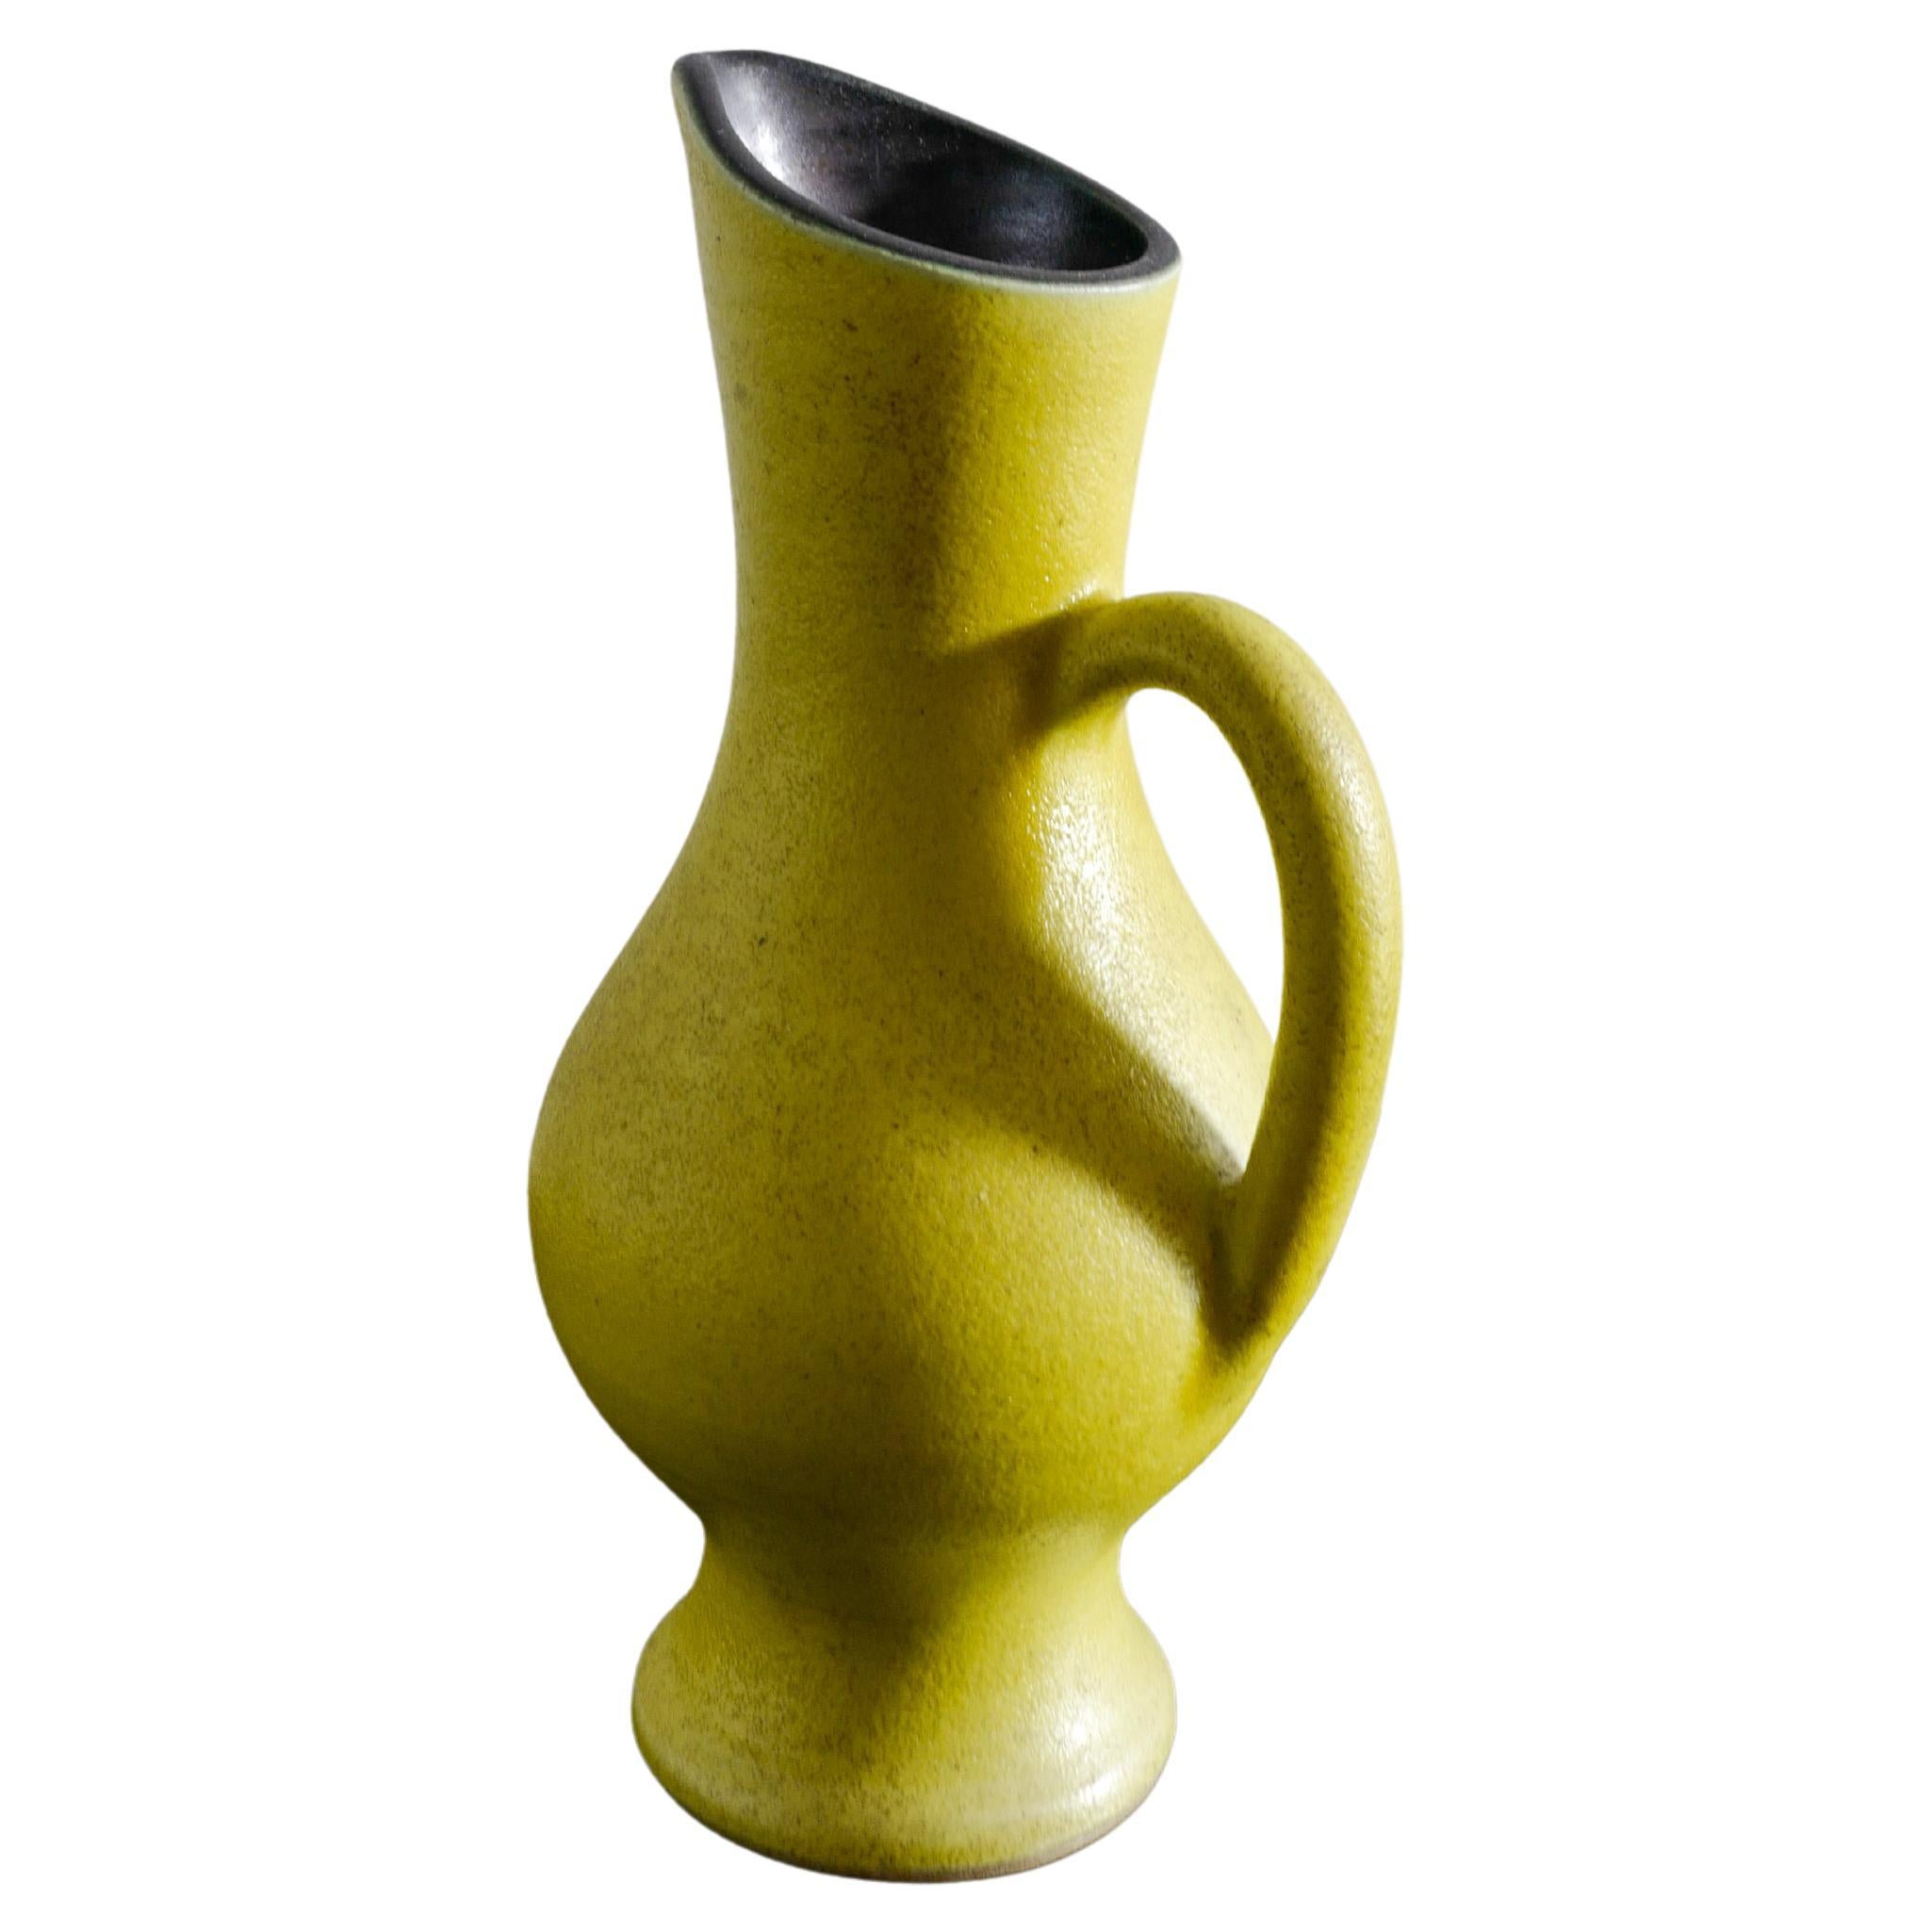 Pol Chambost Mid-Century Pitcher Jug Vase in Yellow Produced in France, 1950s